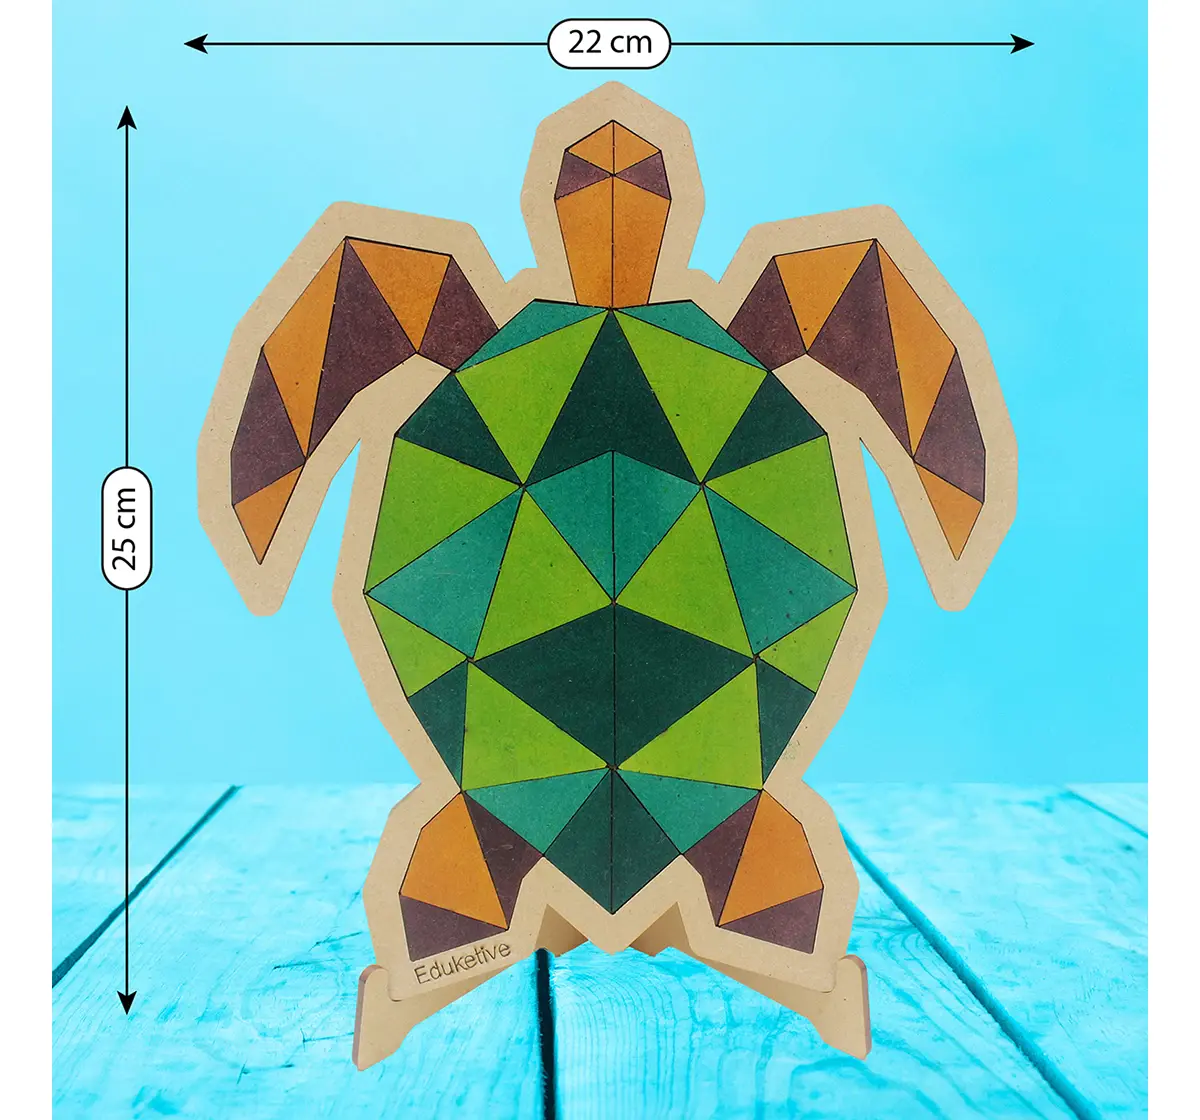 Eduketive PuzzleDecor Turtle Decorative Coloring Puzzle with Stand 51 Pieces Kids Age 3-12 Years Old + Free Colors